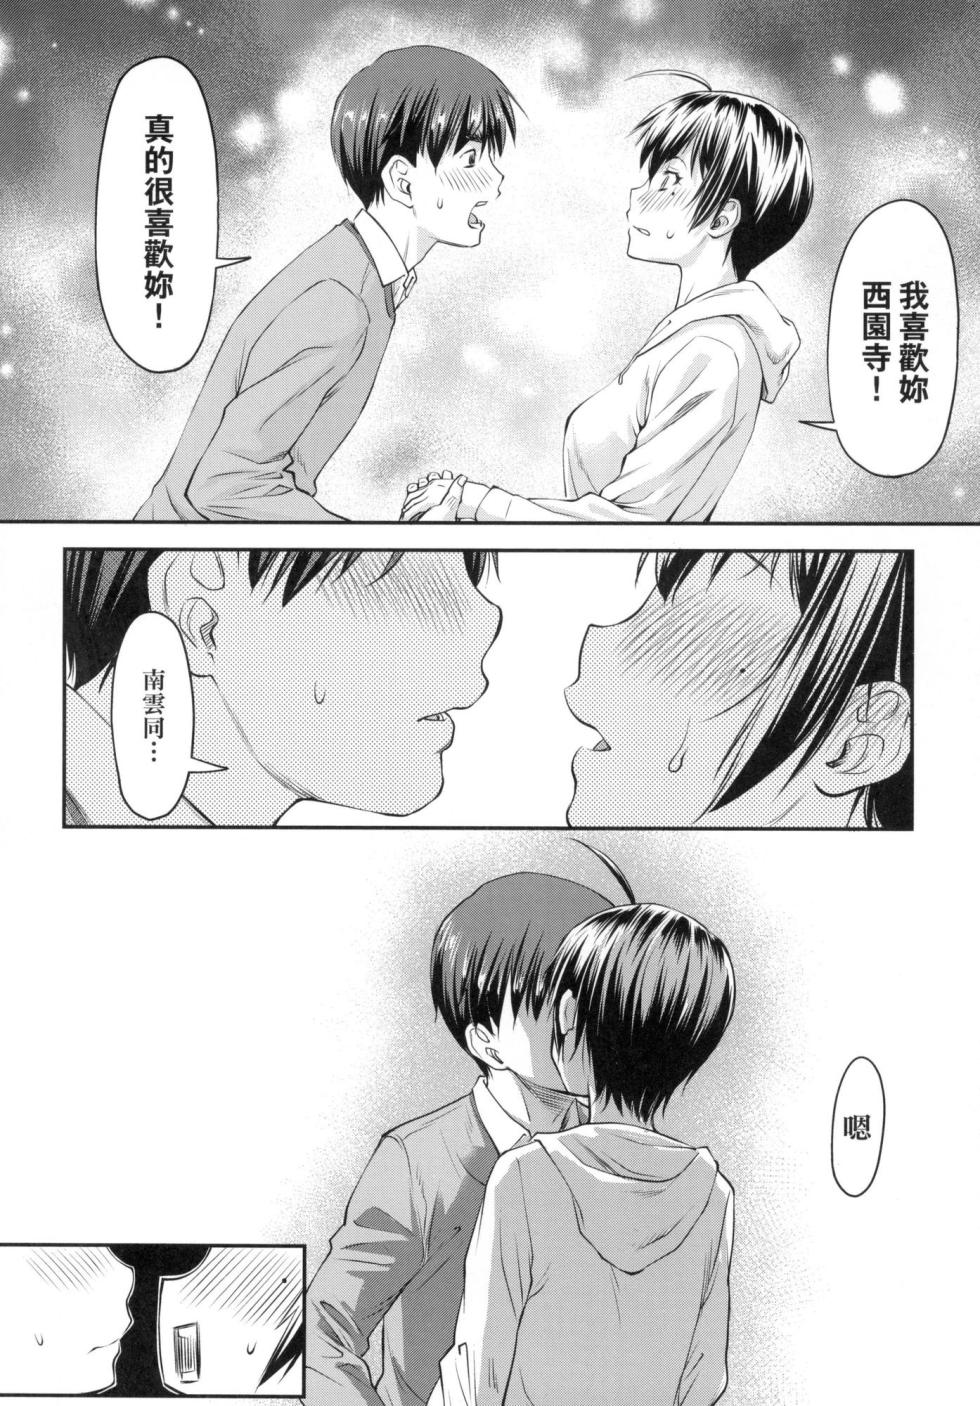 [Nagare Ippon] Kaname Date Jou | 小要開發Date 上 [Chinese] [Decensored] - Page 17